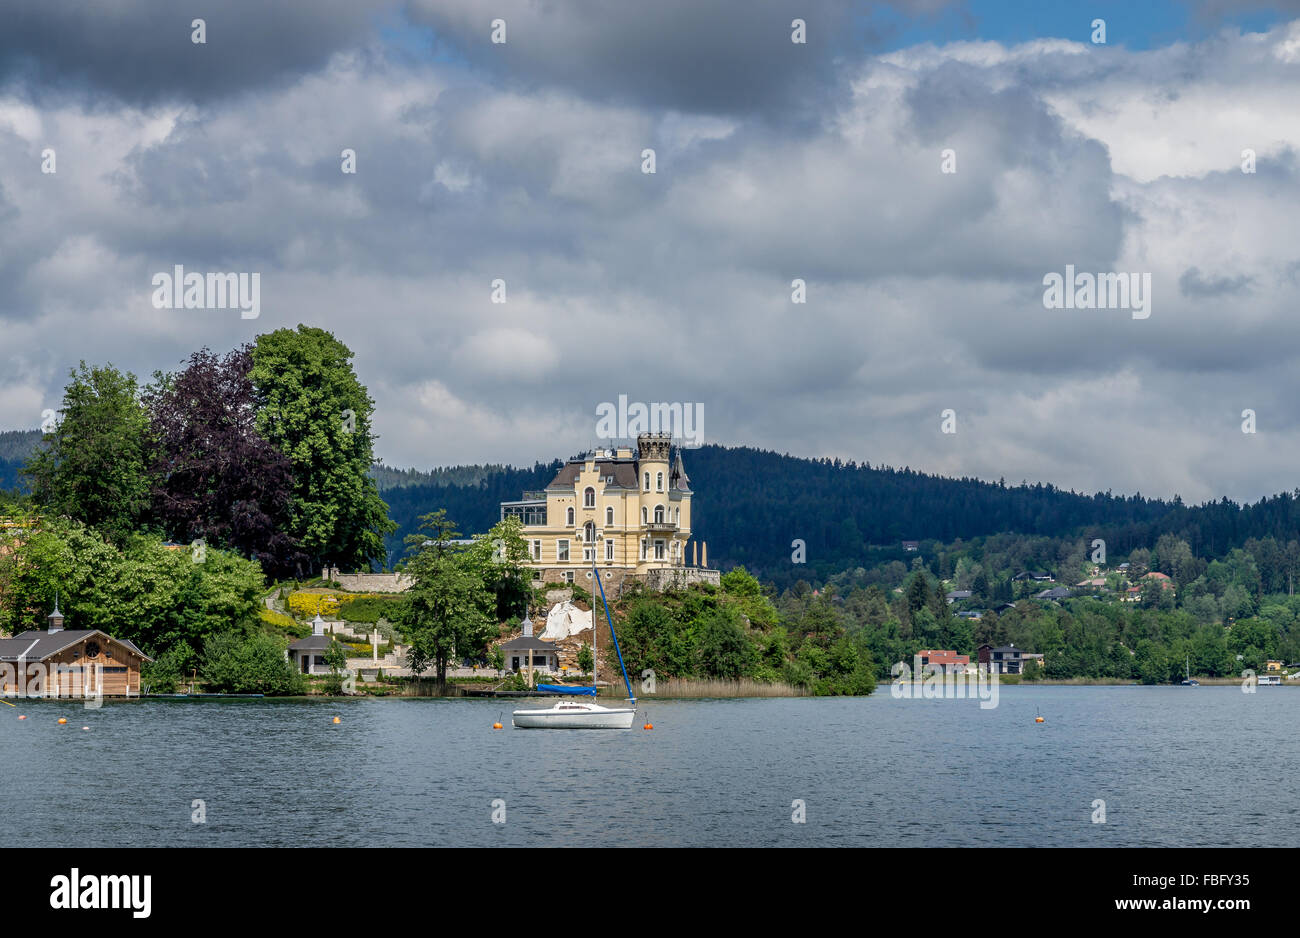 Reifnitz, a village in Carinthia, Austria, located at the Lake Woerther. Stock Photo